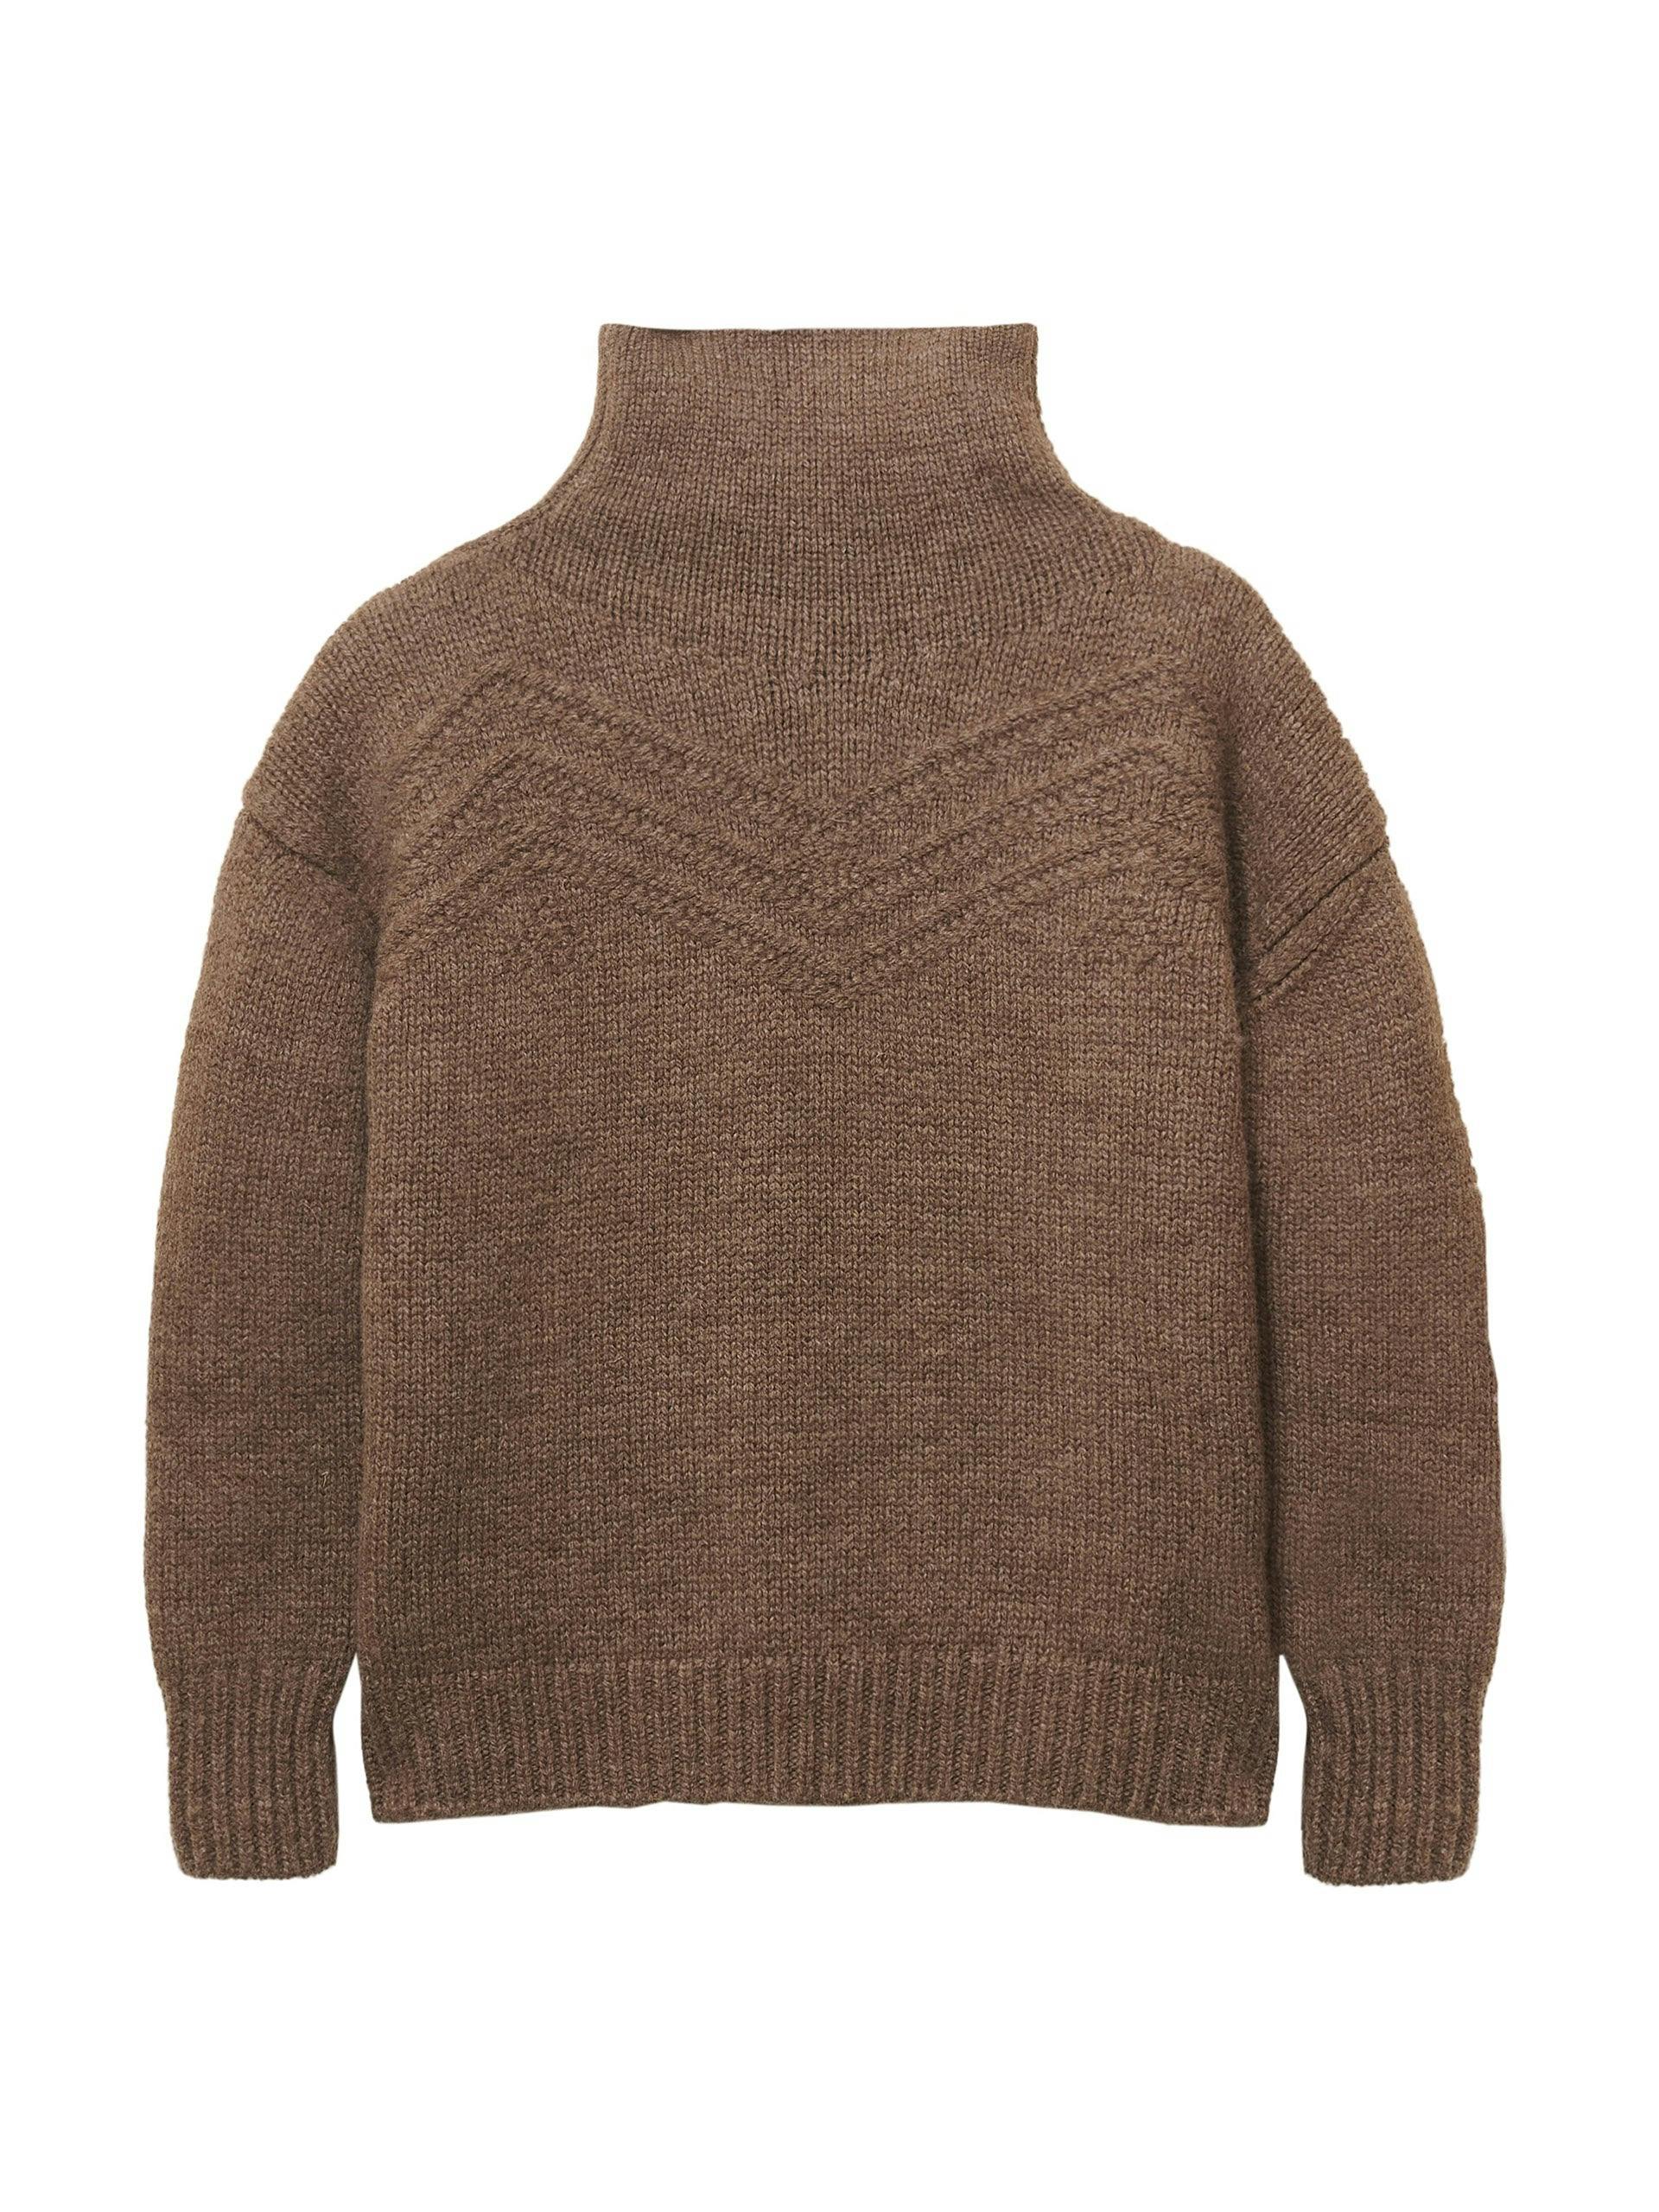 The Lorton funnel knit in un-dyed brown